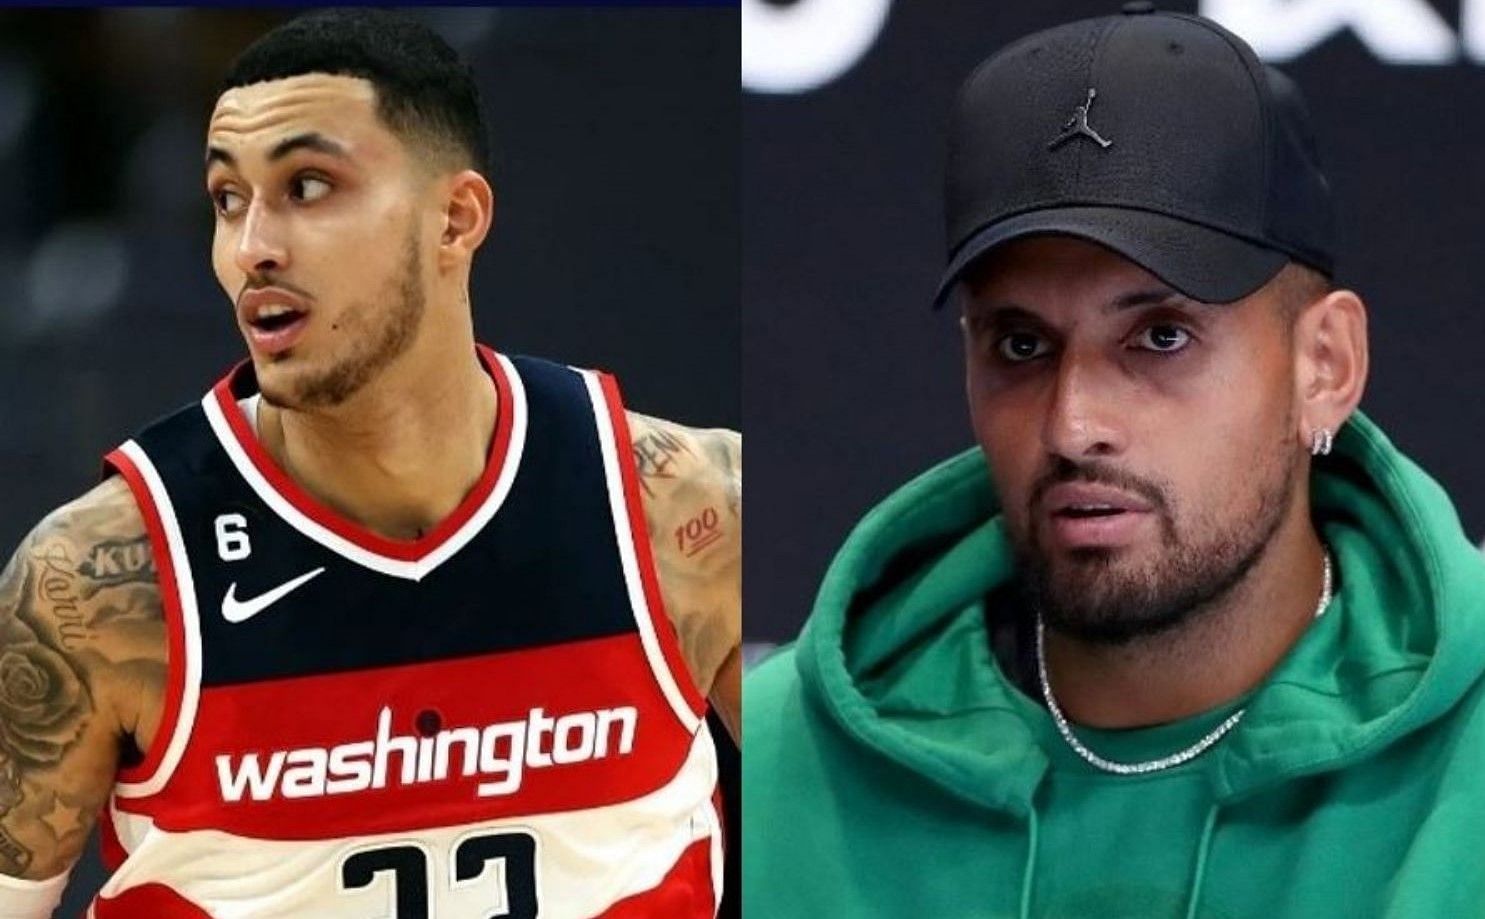 Tennis star Nick Kyrgios (R) is in disbelief that Washington Wizards forward Kyle Kuzma was signed to a lucrative contract.